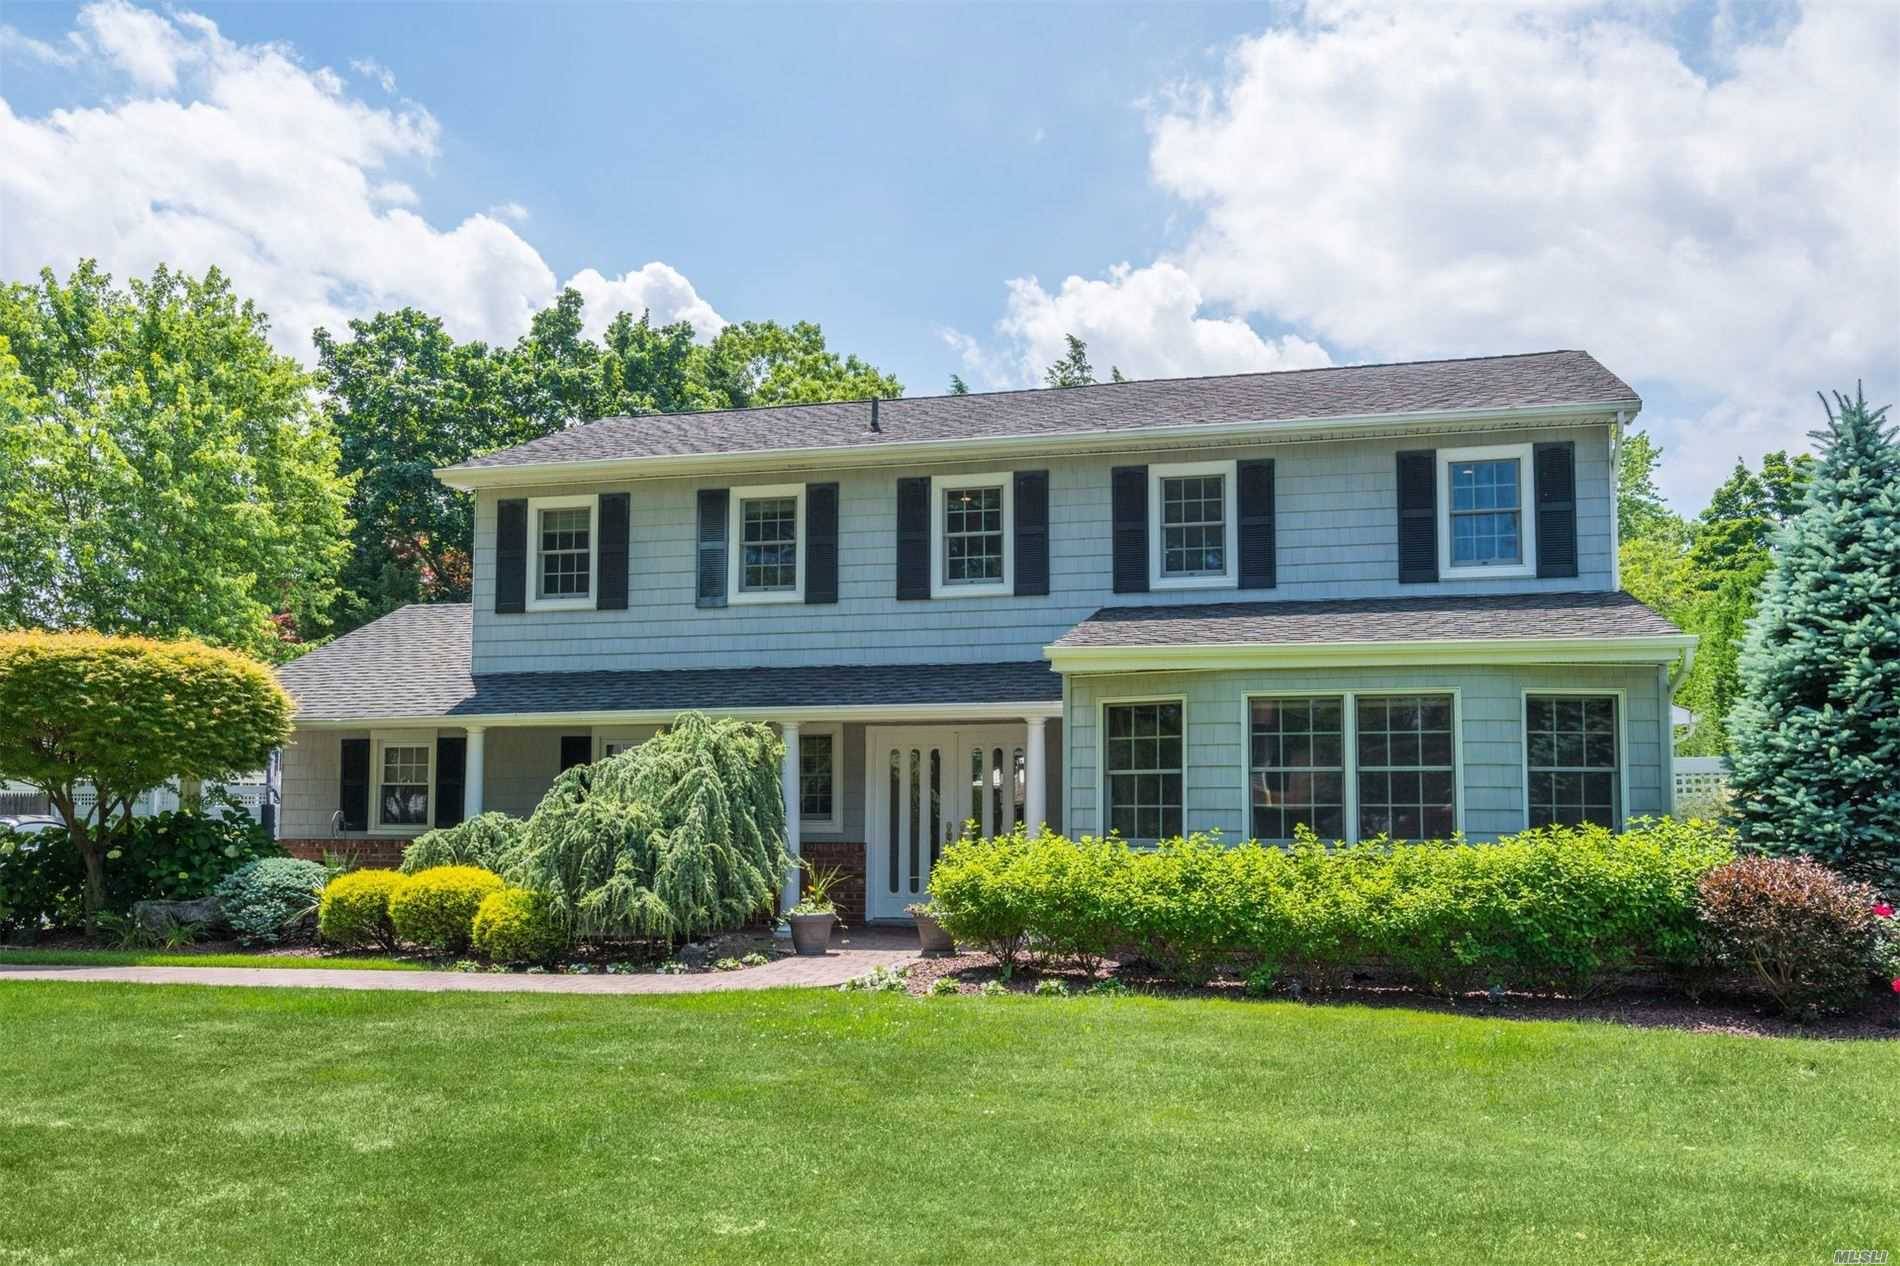 Pristine amp ; Immaculate Five Bedroom Expanded Colonial Located On Beautiful Quiet Tree Lined Street In East Northport Commack SD 10.